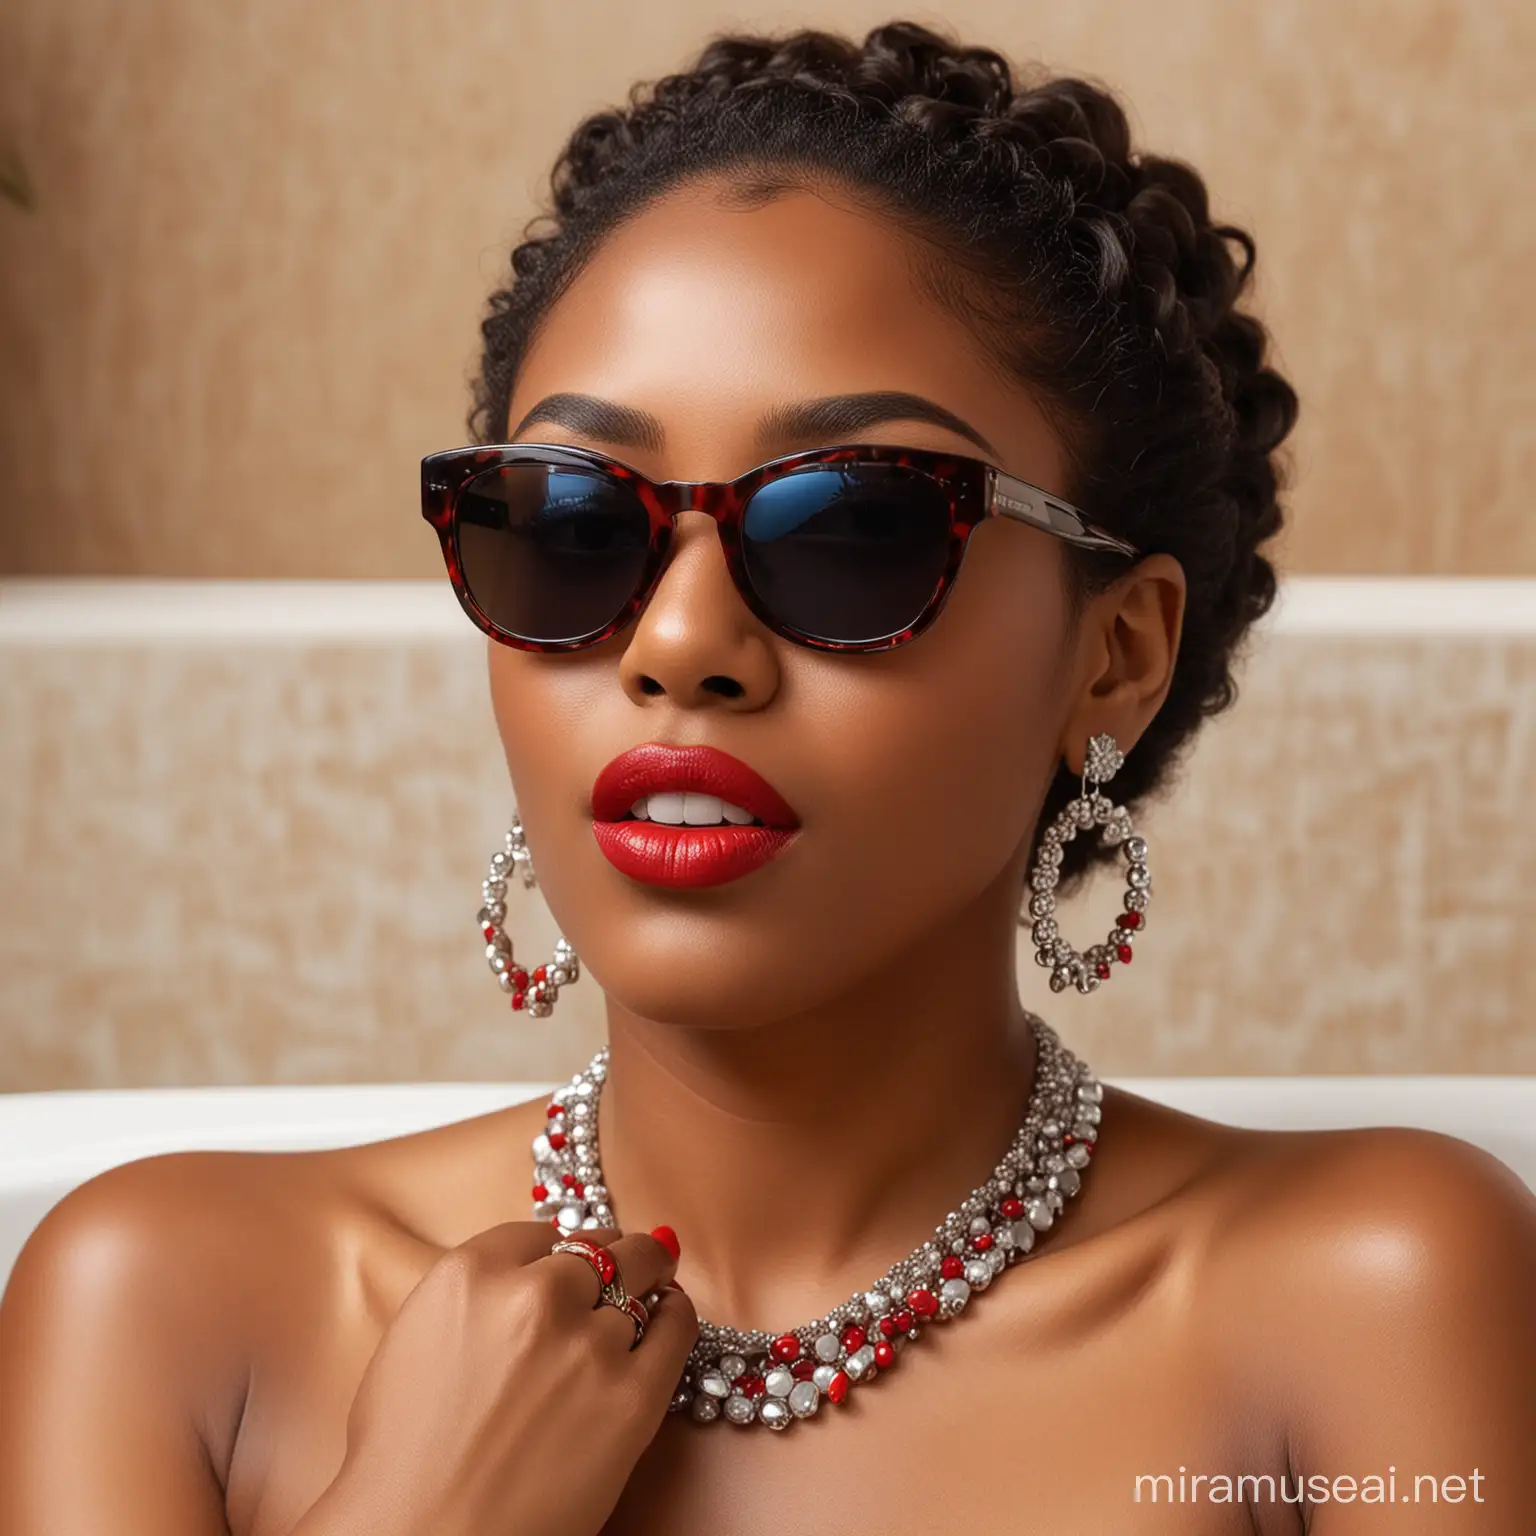 Stylish Melanin Woman Relaxing at Spa with Red Lipstick and Nail Polish